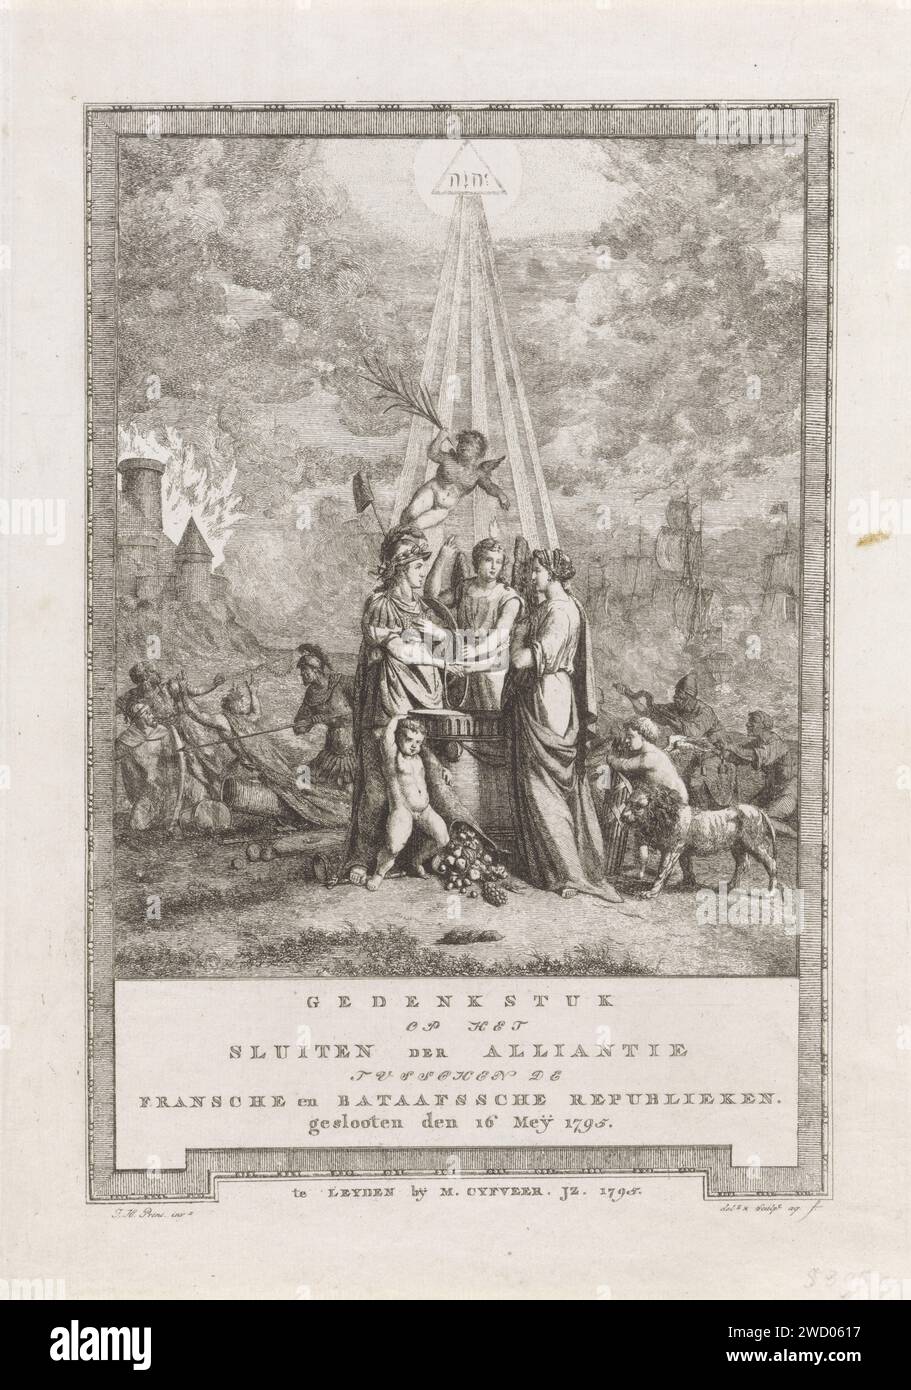 Allegory at the closing of the Alliance, 1795, Johannes Huibert Prins, 1795 print Allegory at the closing of the alliance between the Batavian and French Republics, 16 May 1795. The angel of freedom blesses the Eternal Covenant between the French and the Dutch Virgin. In the background war on land and at sea, on the left, list and deception are chased away. print maker: Netherlandspublisher: Leiden paper etching Freedom, Liberty; 'LibertÃ ' (Ripa) (+ symbolical representation of concept). alliance, league, union, foedus Stock Photo